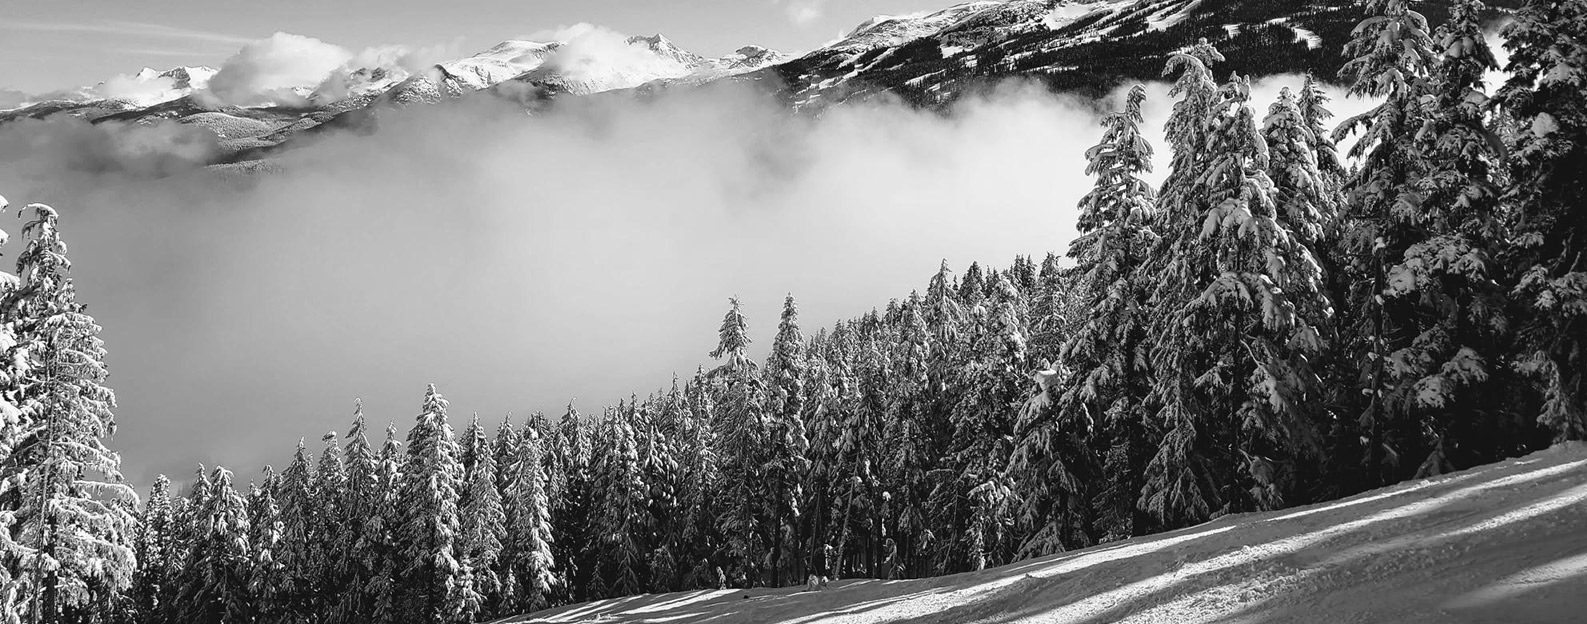 Inspiring Images of Whistler and Vancouver